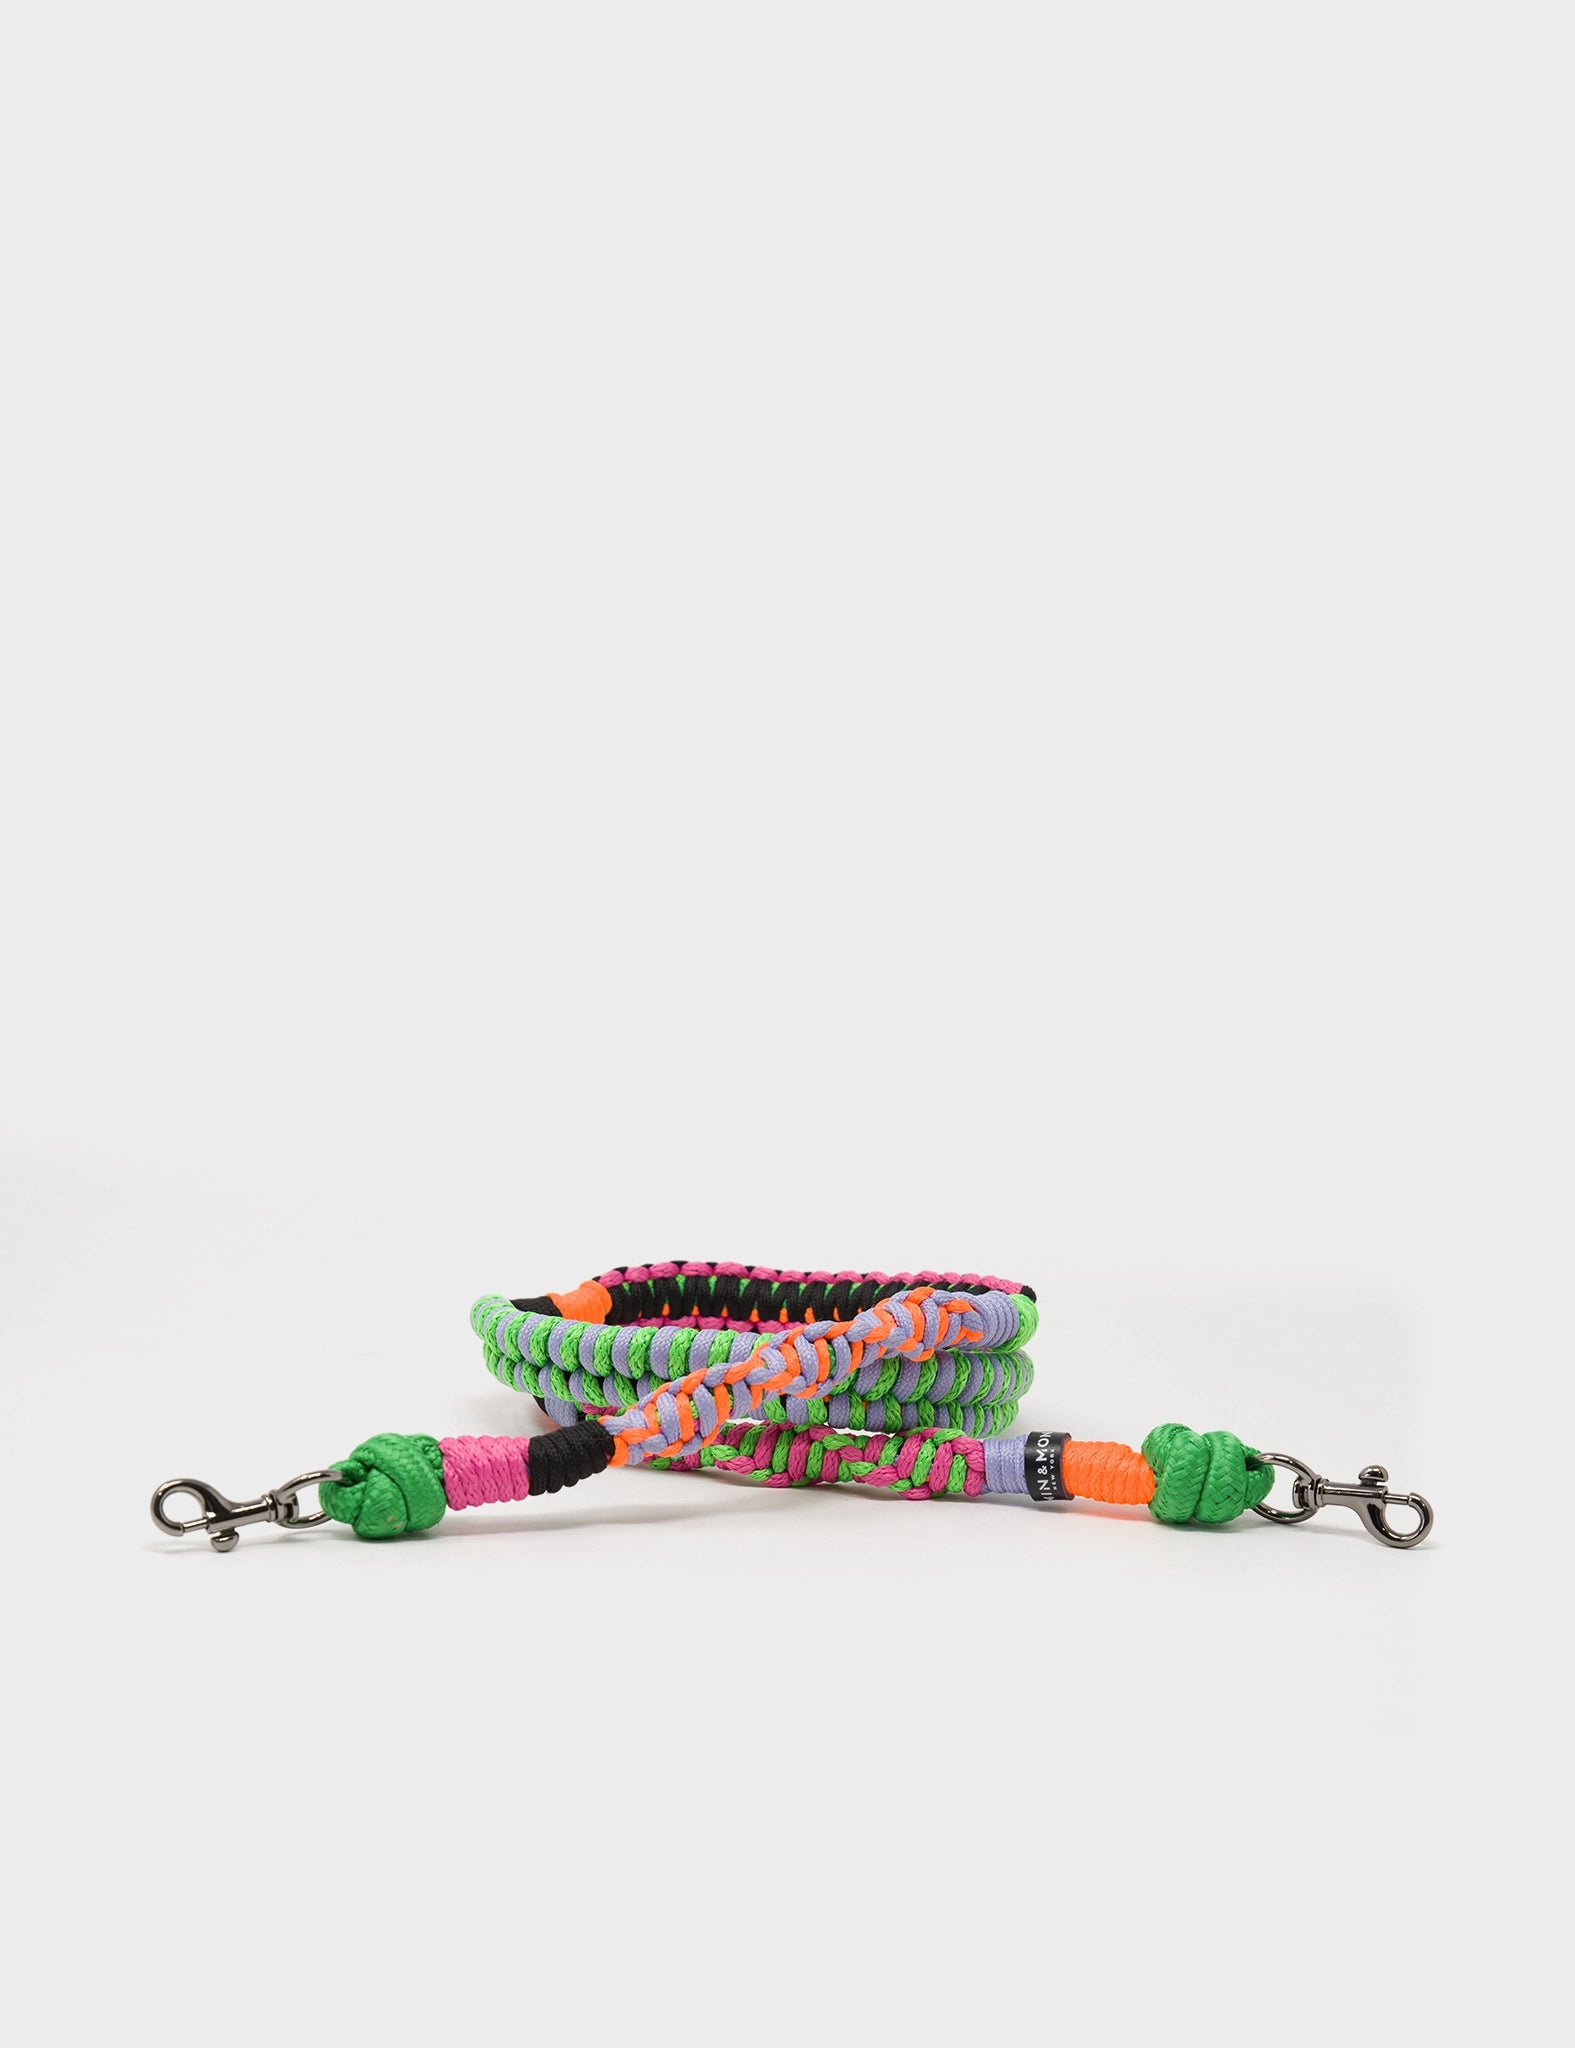 Interchangeable Handwoven Shoulder Strap - Biscay Green and Neon Colors ...